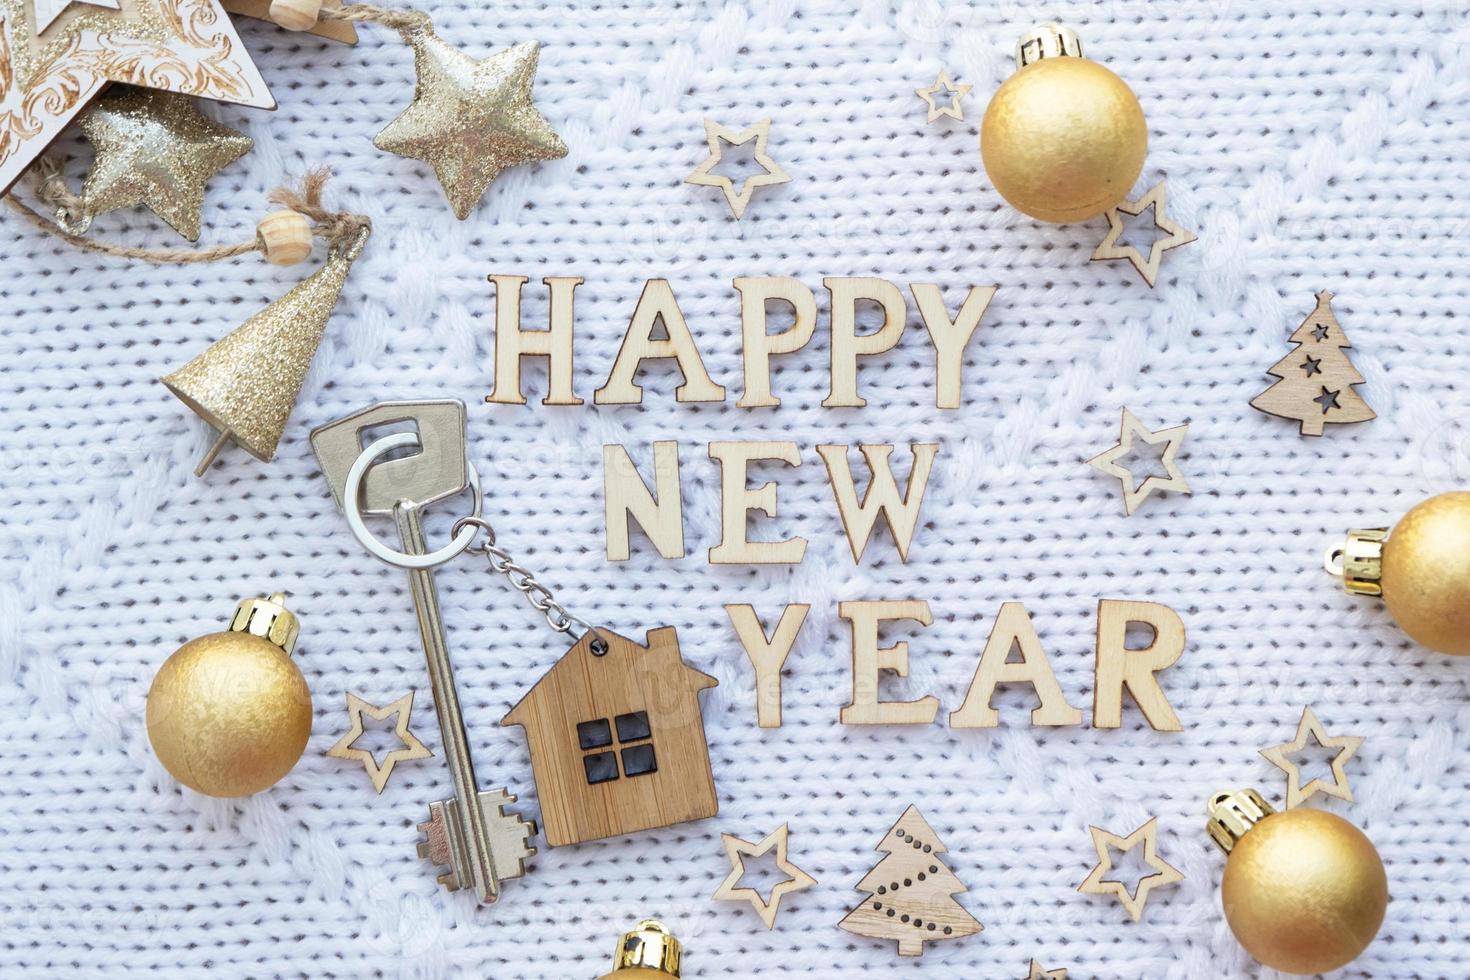 House key with keychain cottage on a festive knitted background with sequins, stars, lights of garlands. Happy New Year-wooden letters, greeting card. Purchase, construction, relocation, mortgage photo